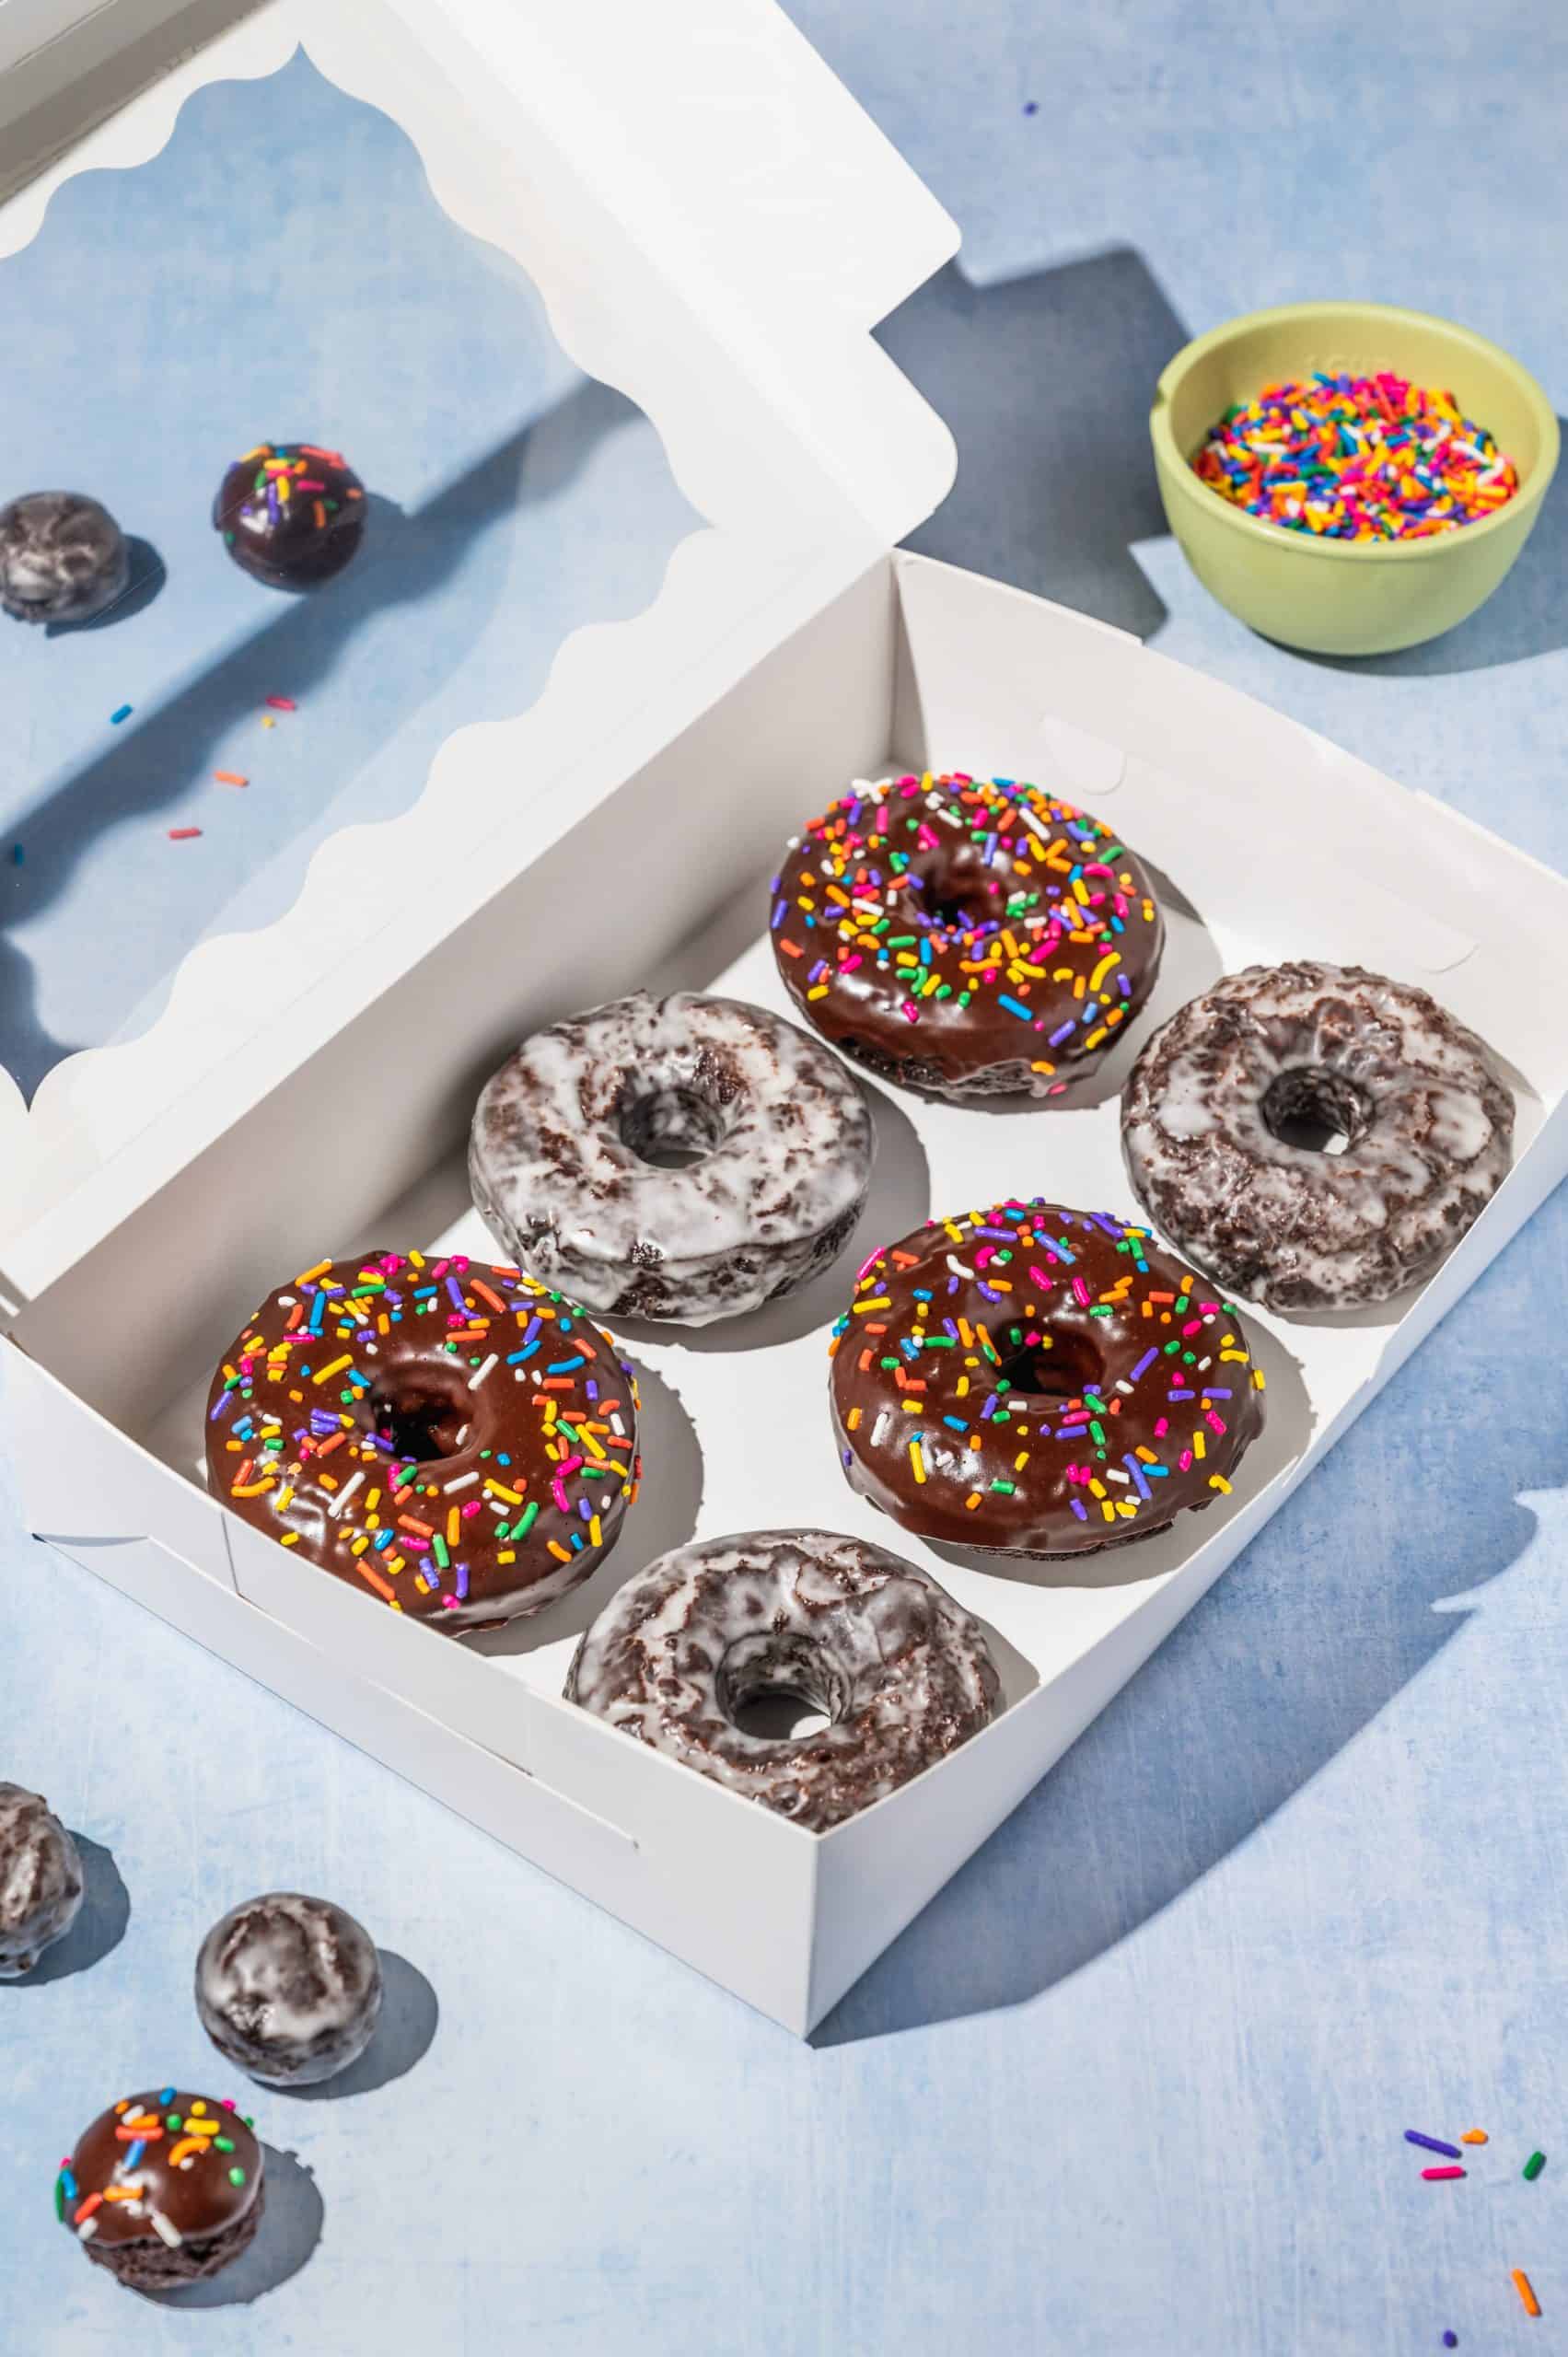 white box with half dozen chocolate donuts (3 glazed, 3 chocolate frosted with sprinkles)